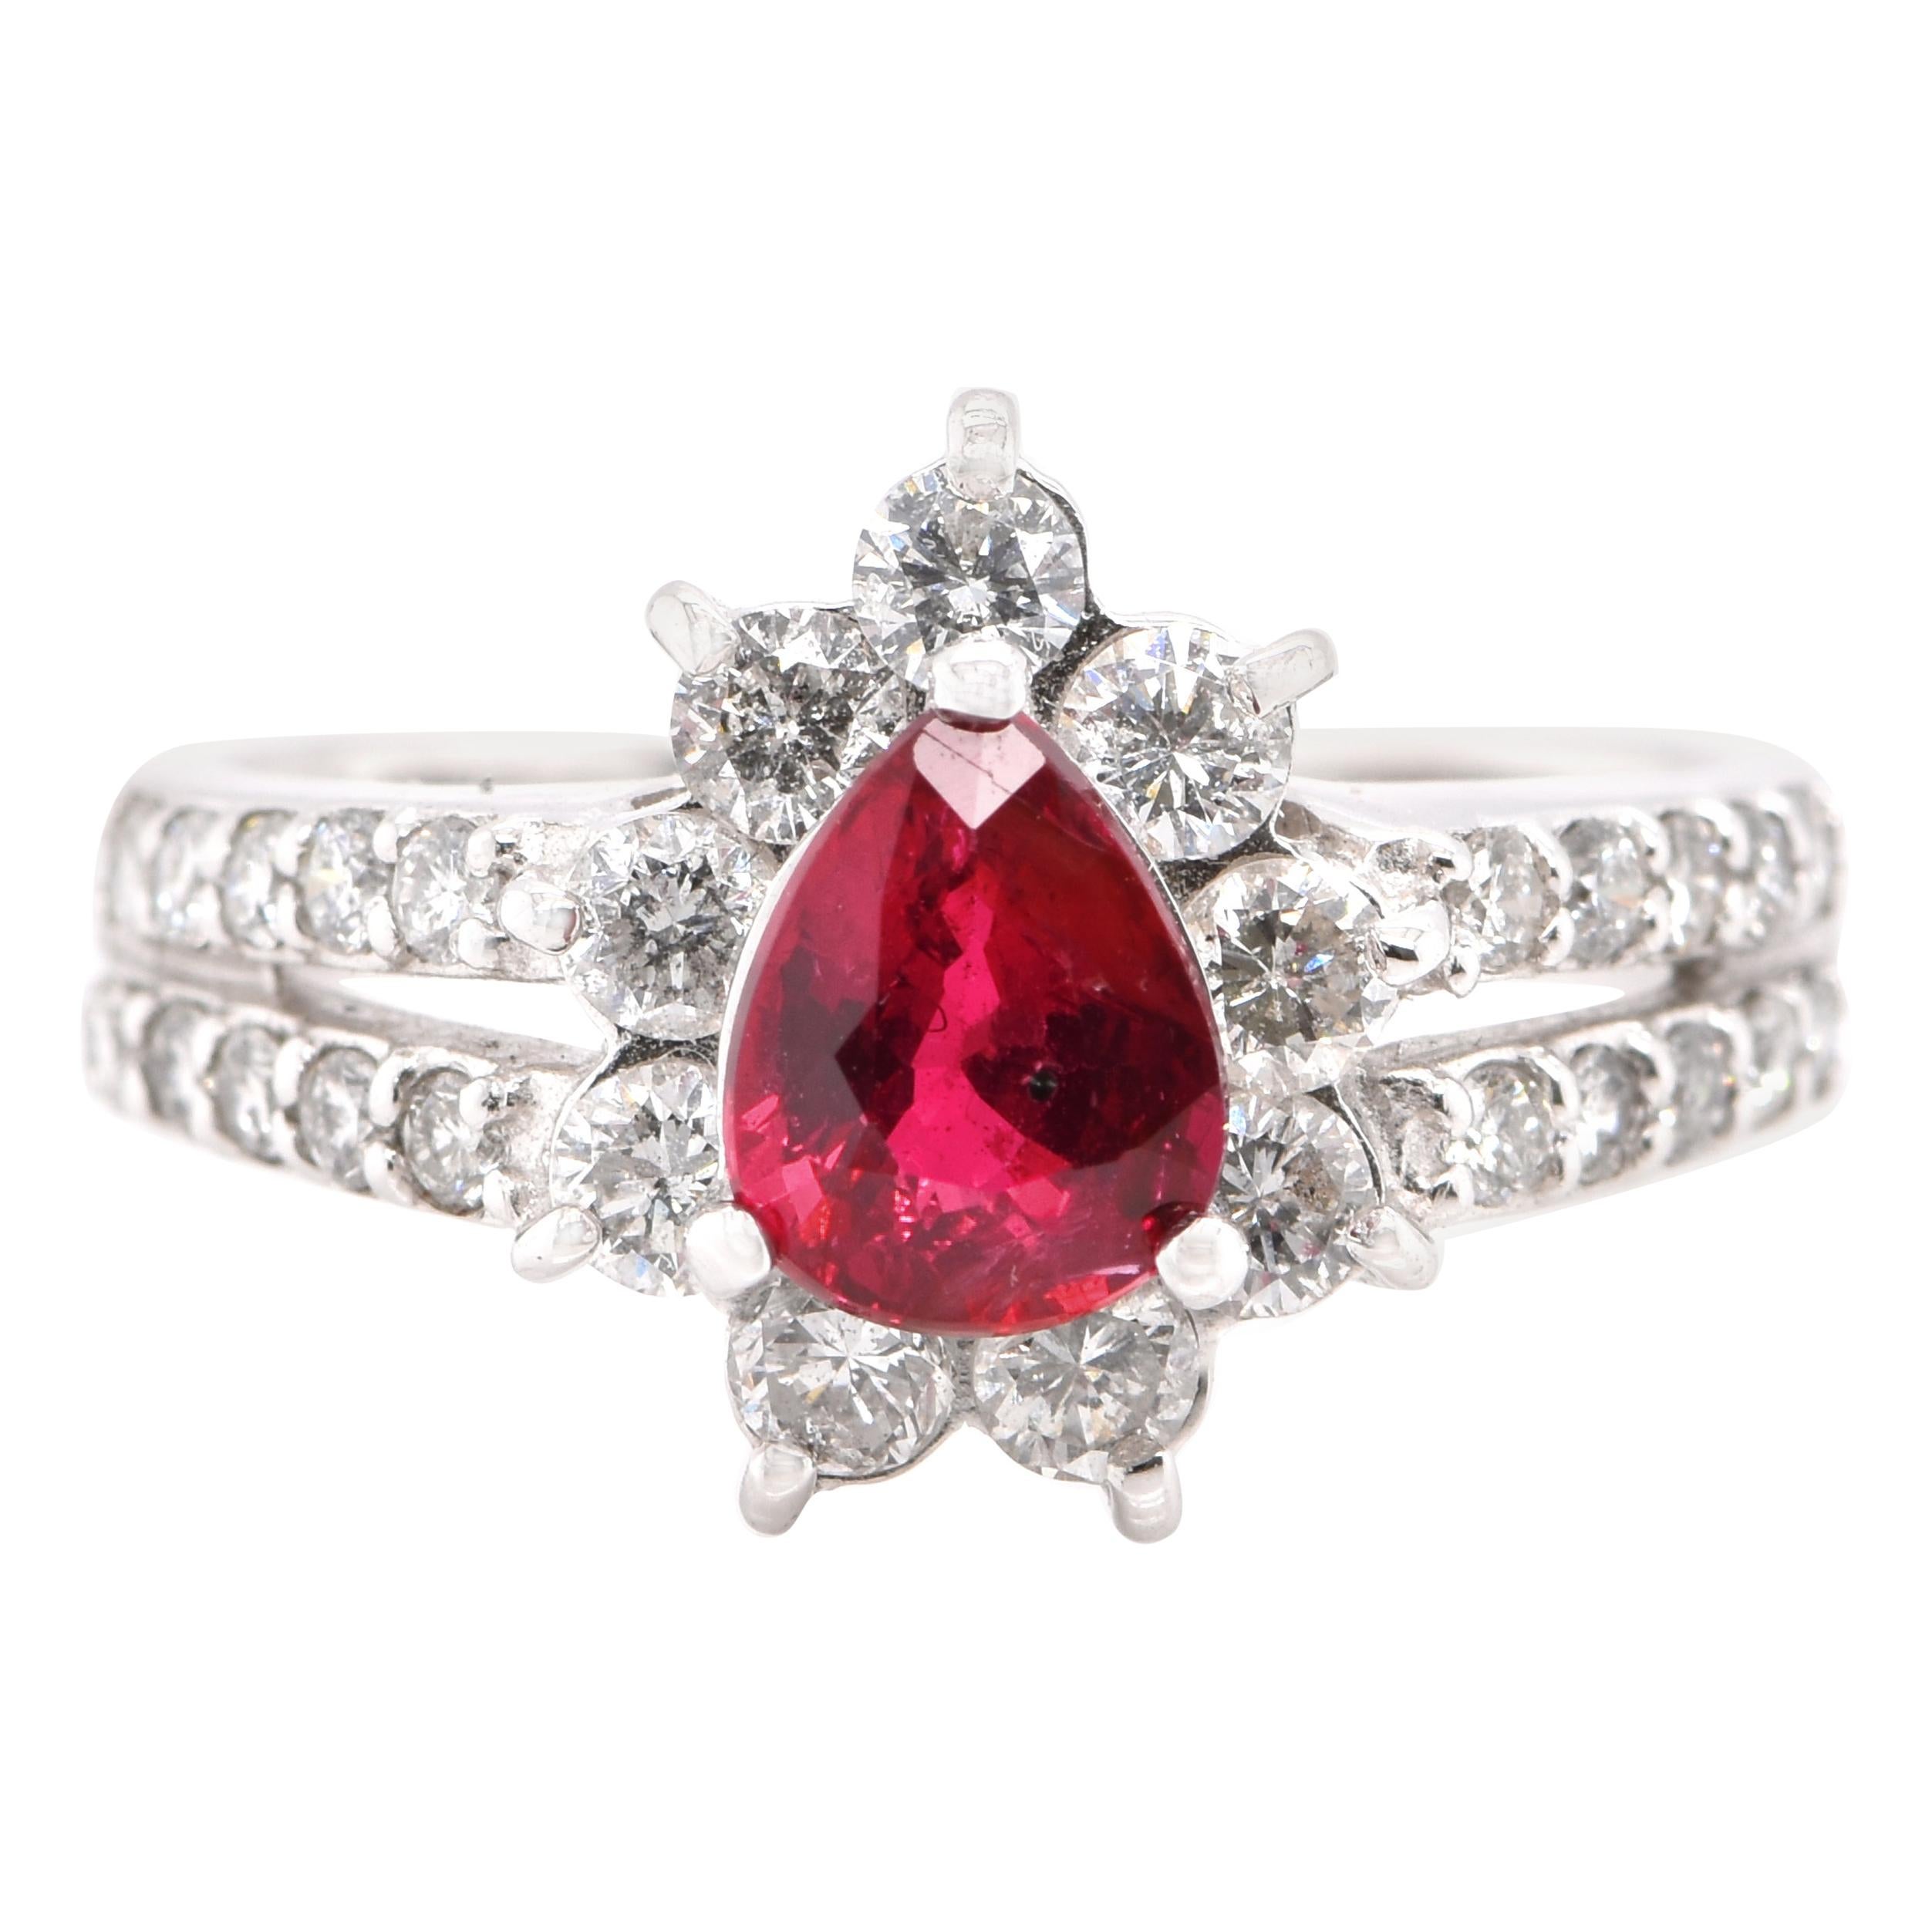 GIA Certified 1.02 Carat Natural Untreated 'No Heat' Ruby Ring Set in Platinum